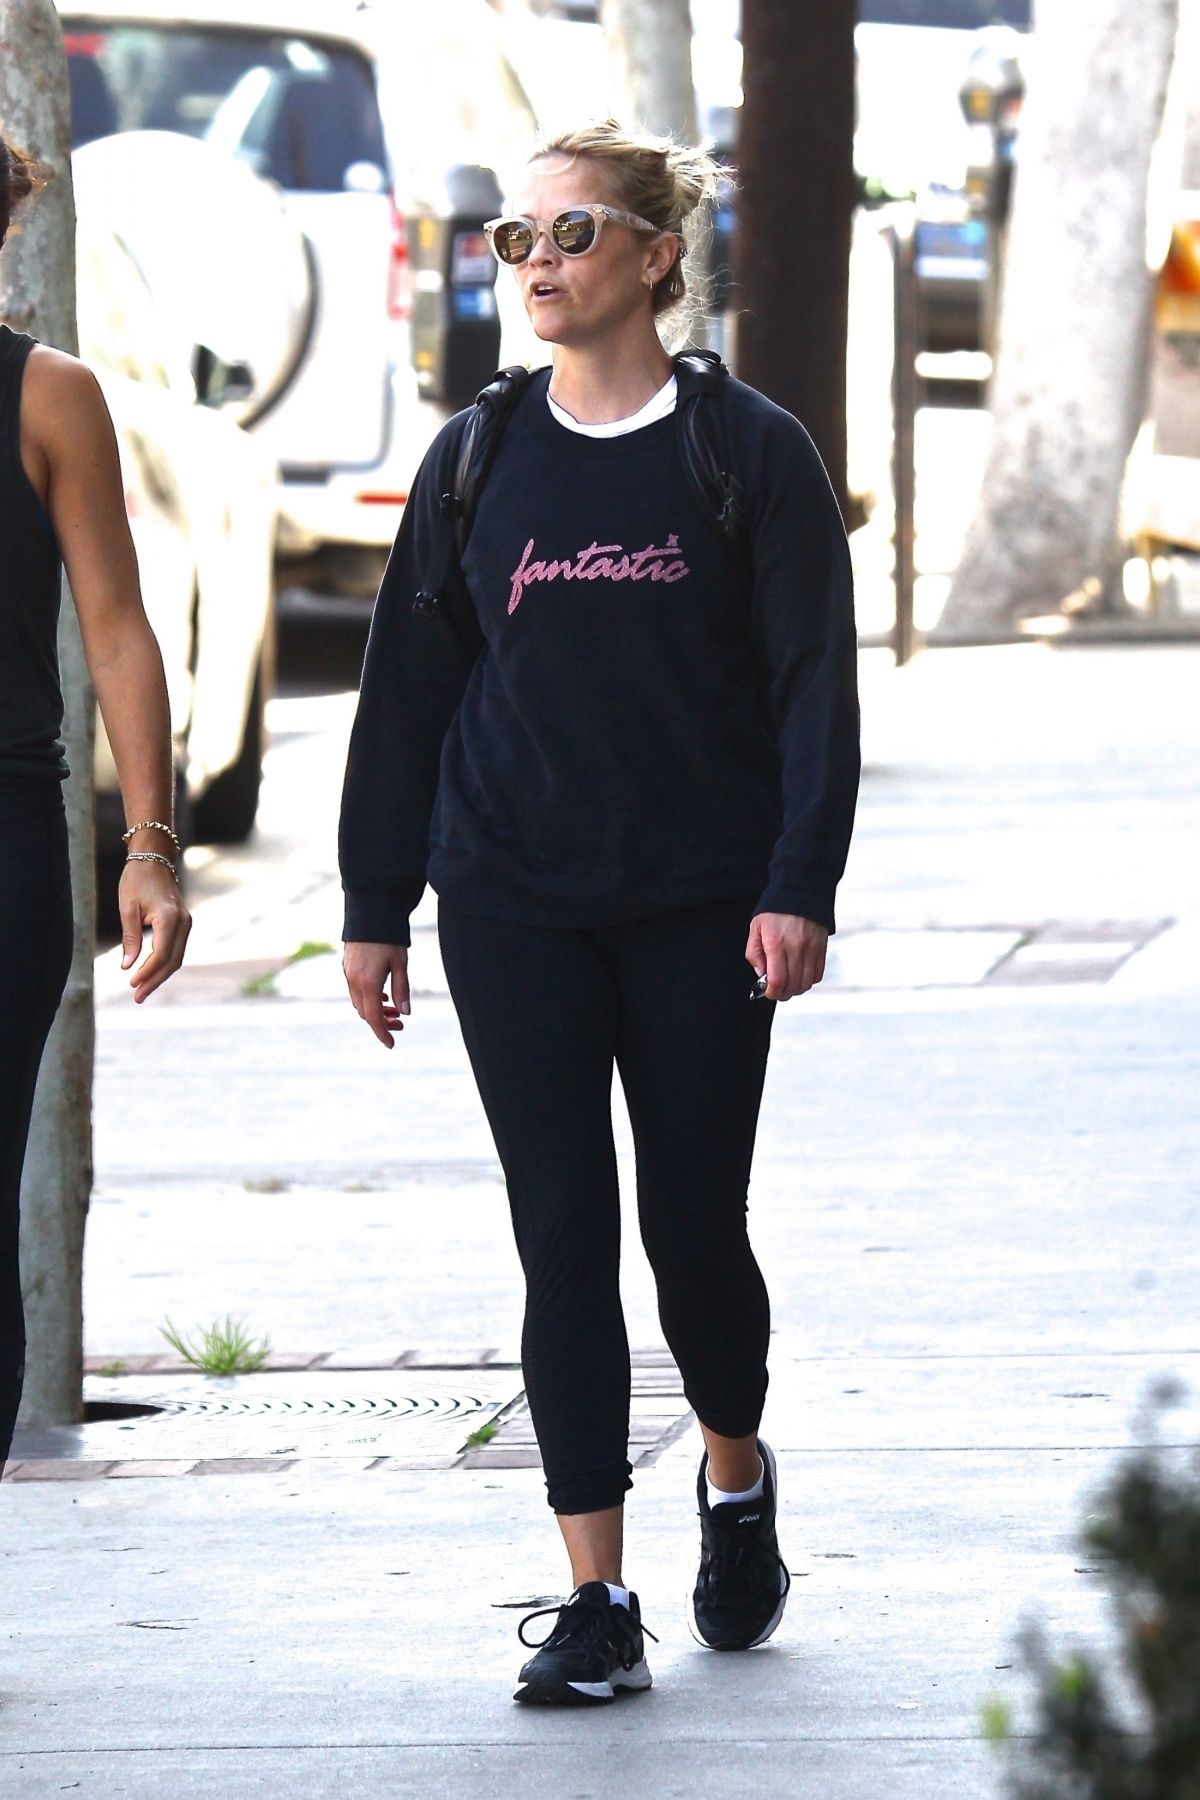 REESE WITHERSPOON Out and About in Brentwood 04/09/2018 – HawtCelebs